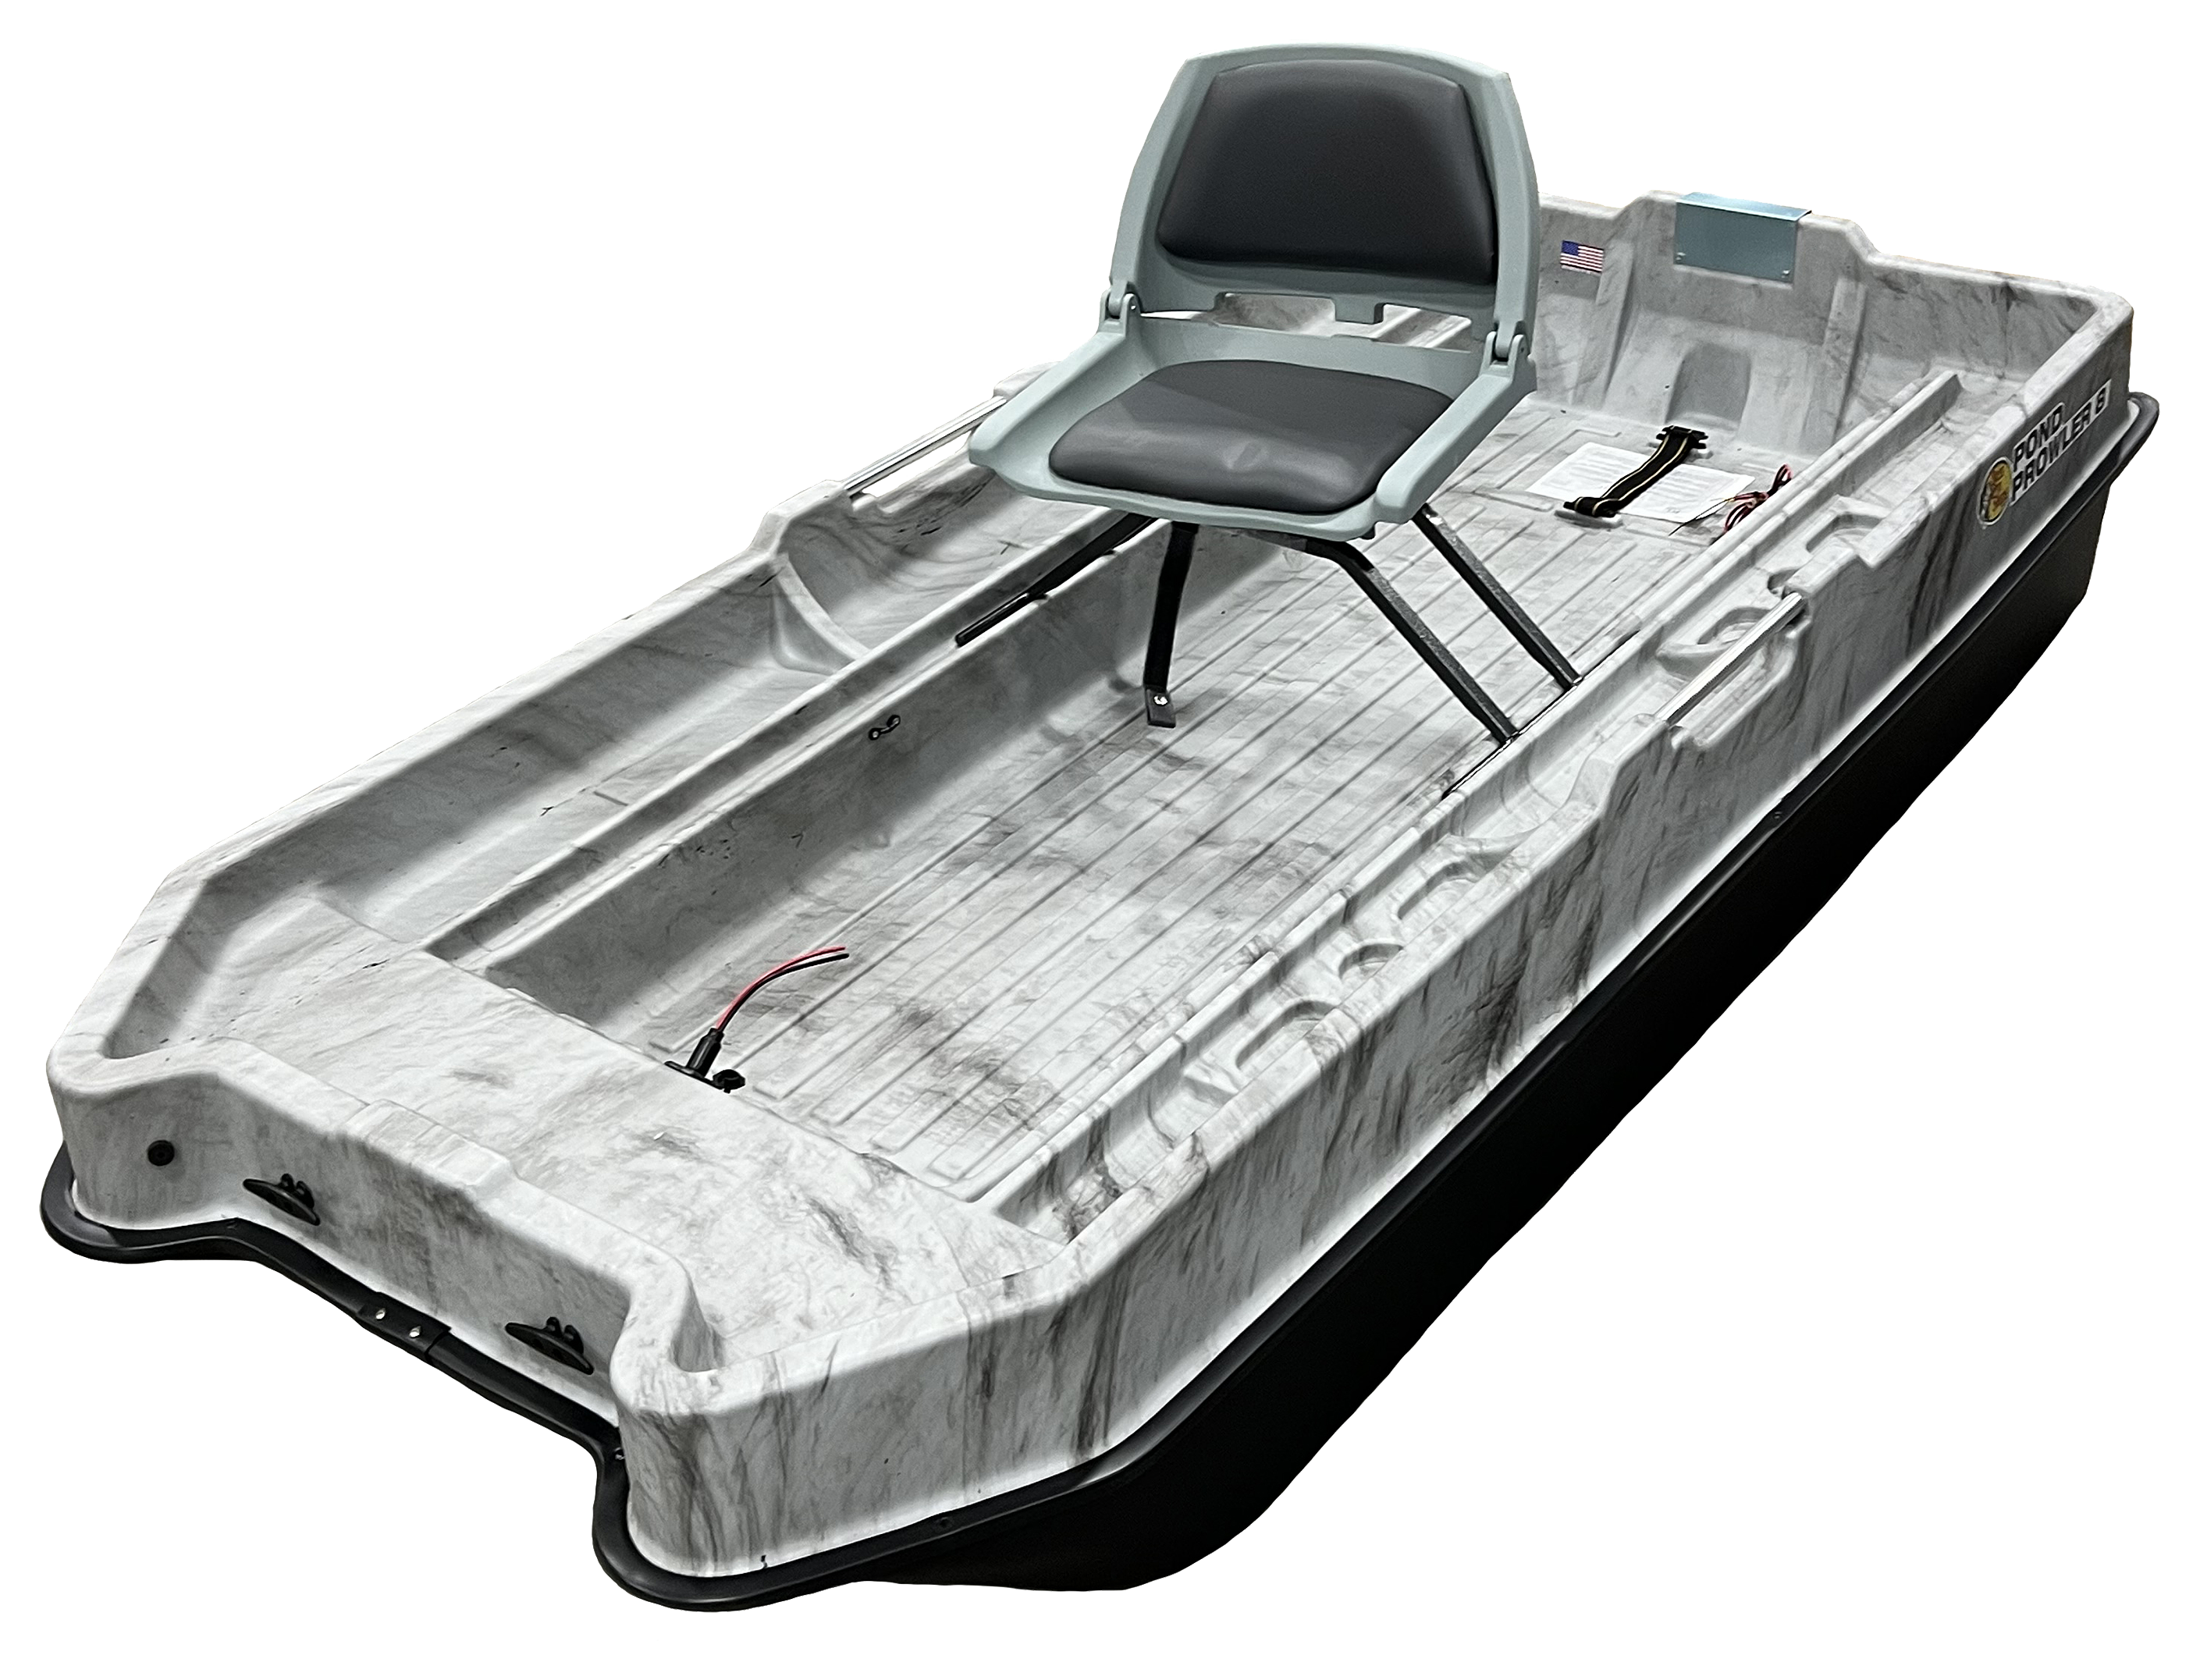 Bass Pro Shops Pond Prowler 8 Fishing Boat